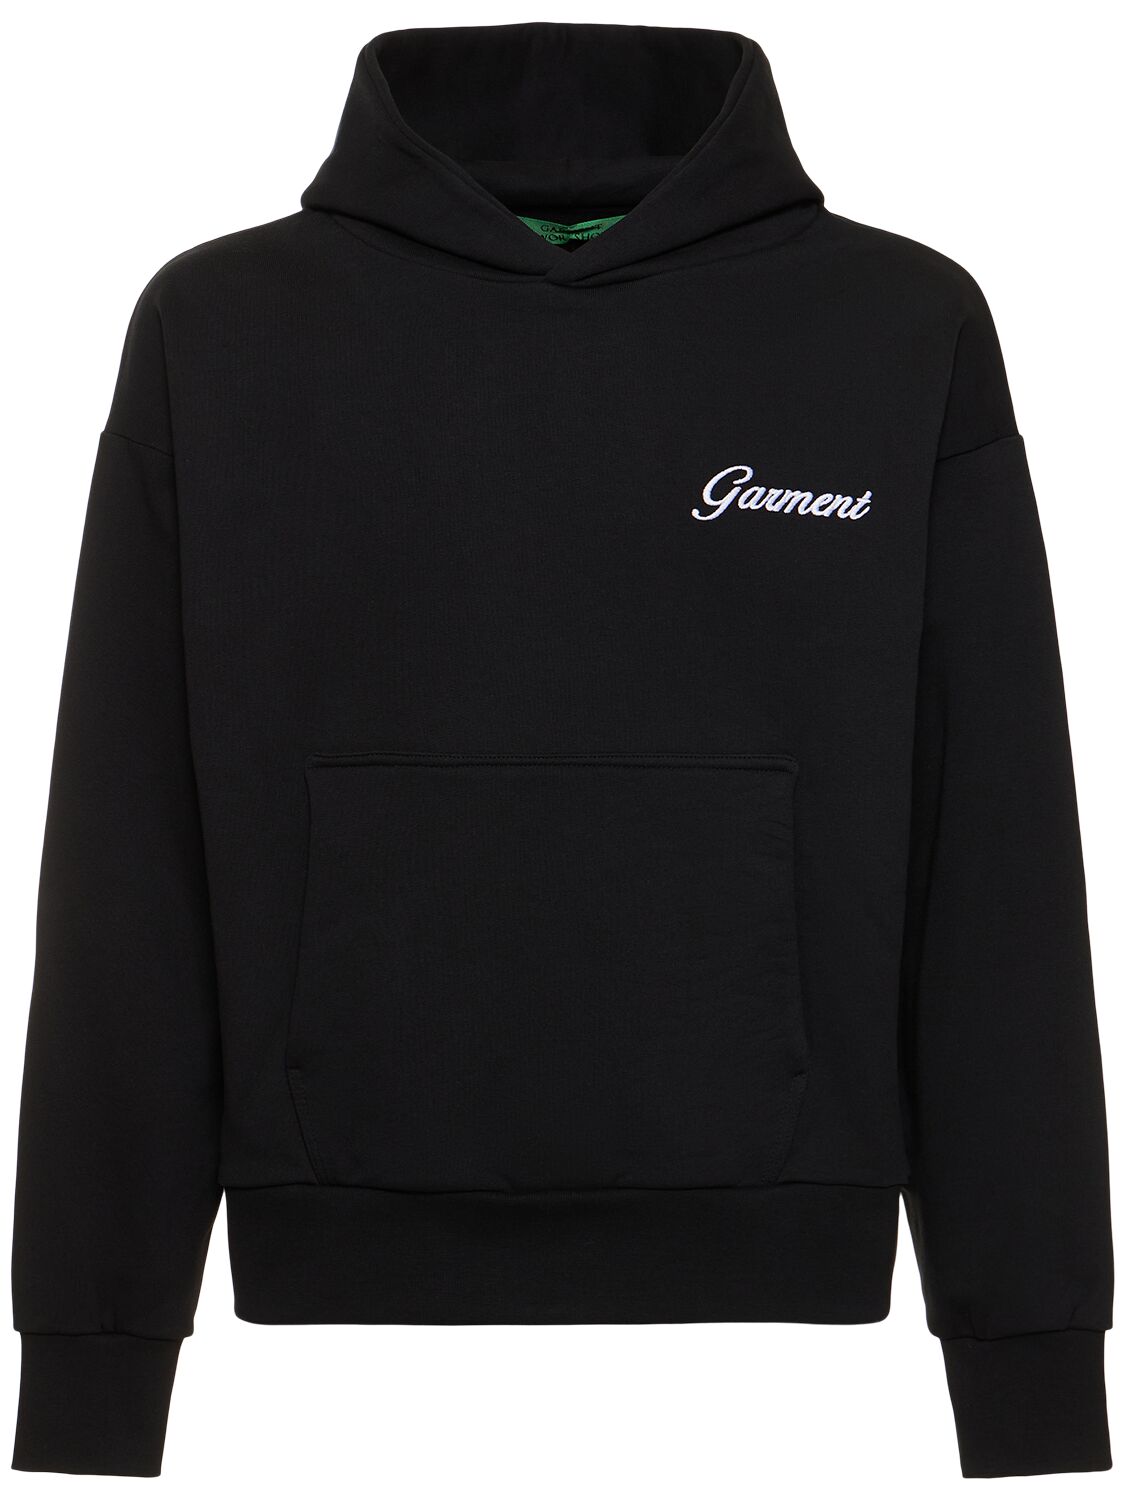 Image of If You Know You Know Embroidered Hoodie